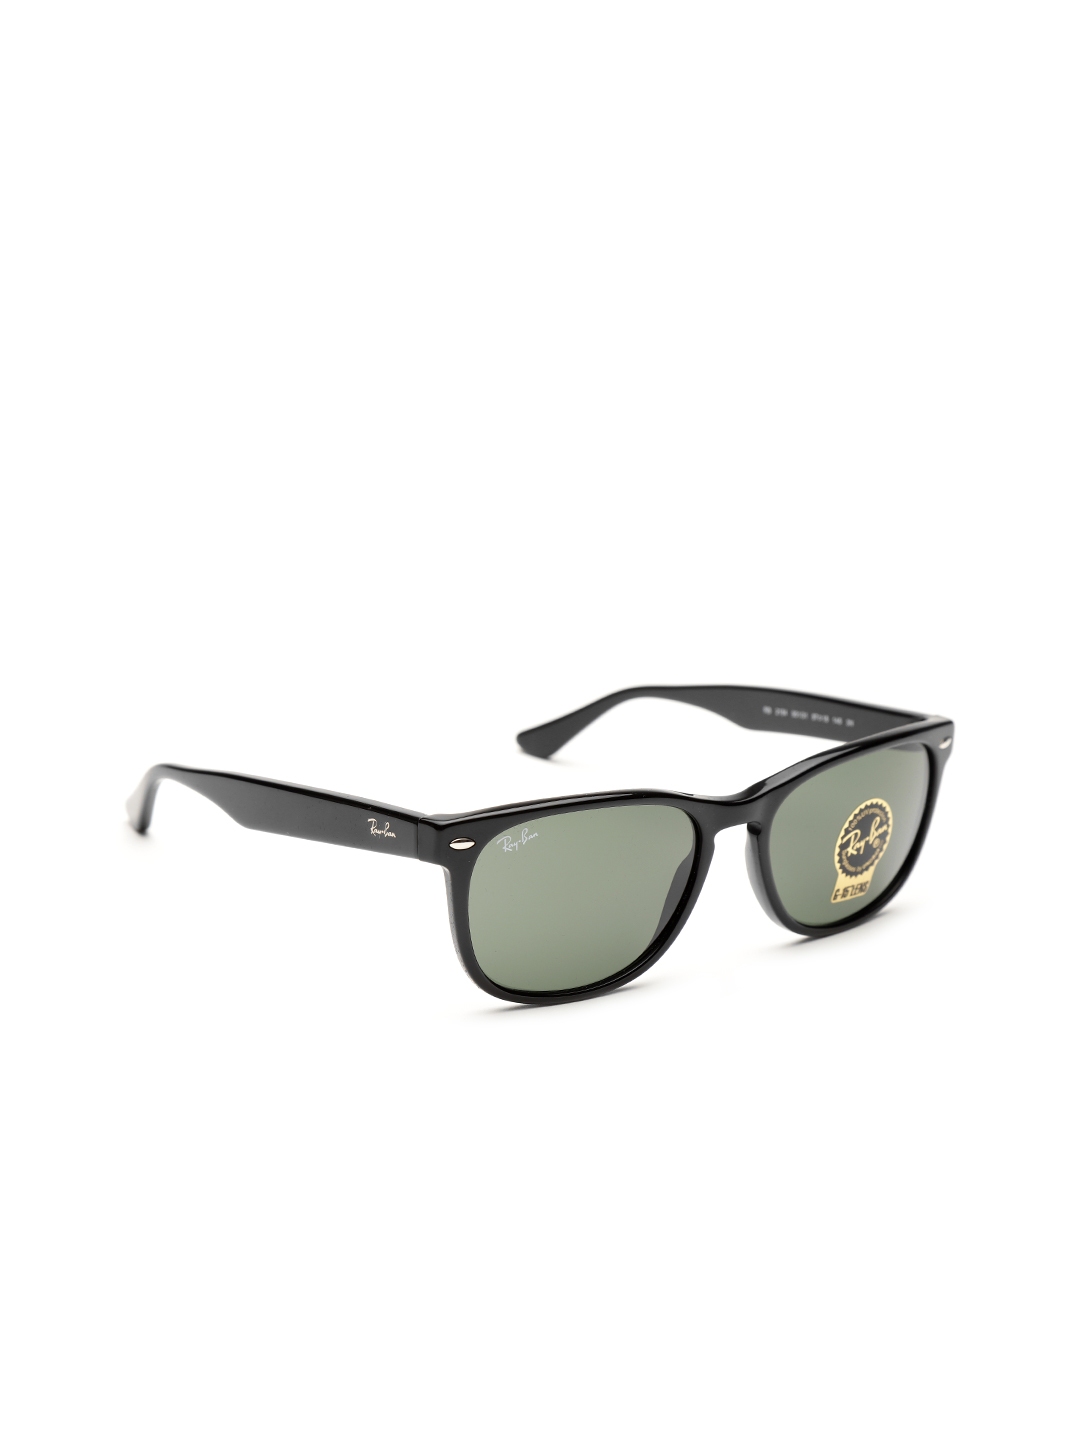 ray ban rectangle sunglasses on face